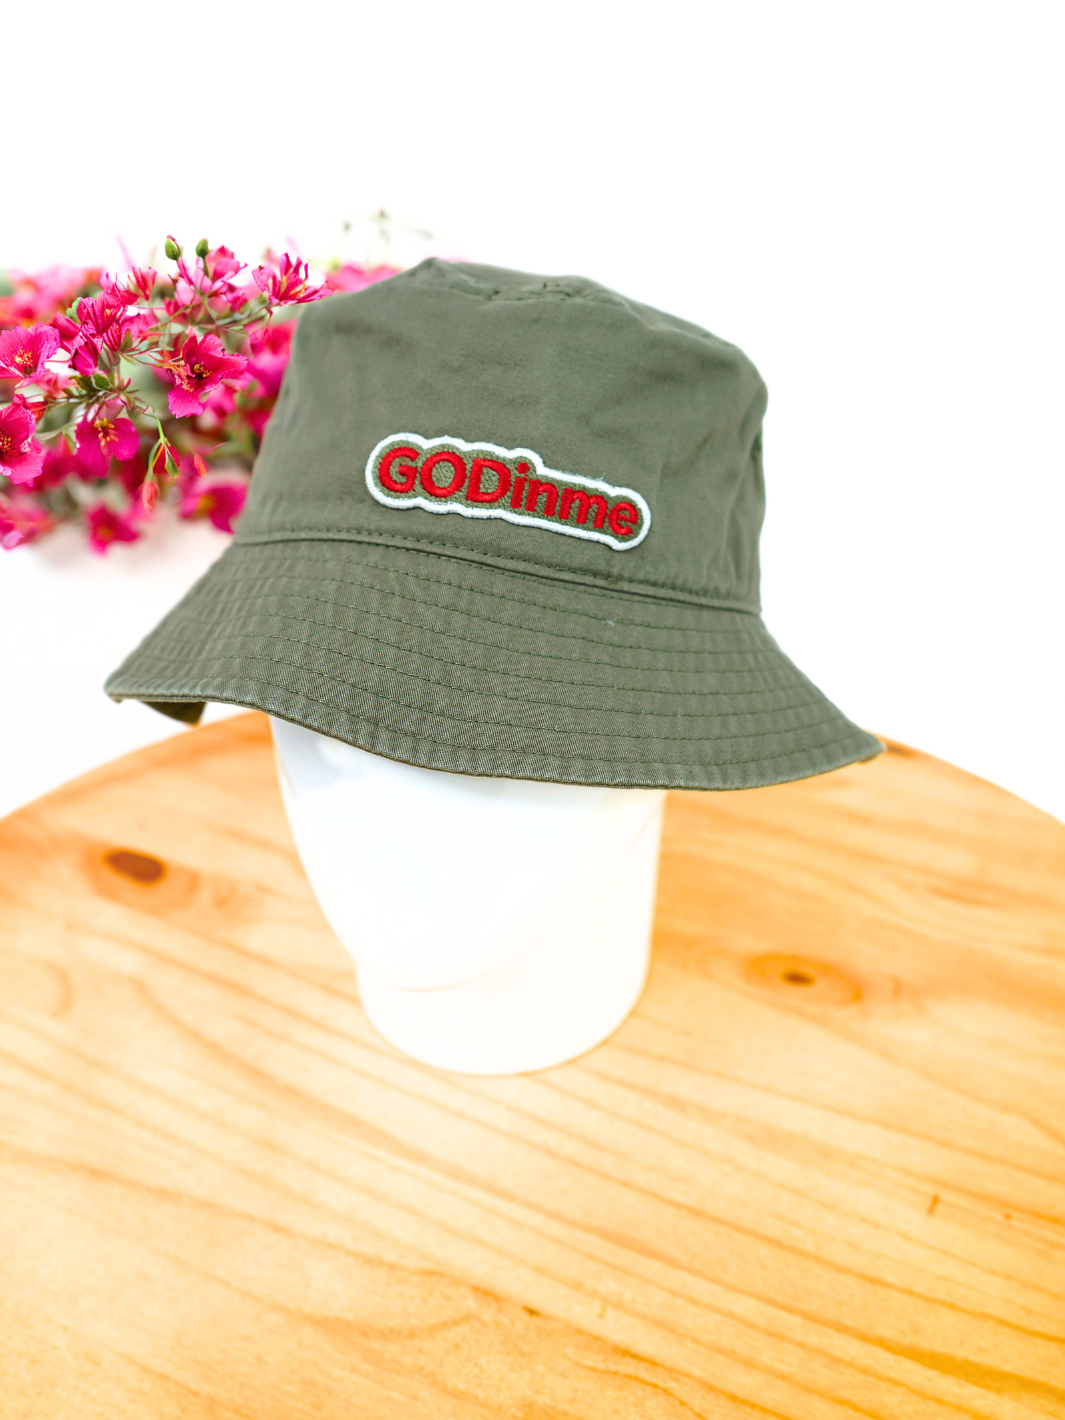 Represent your timeless style with this Olive Green GODinme Bucket Hat featuring GODinme brand name and logo embroidered in Red.